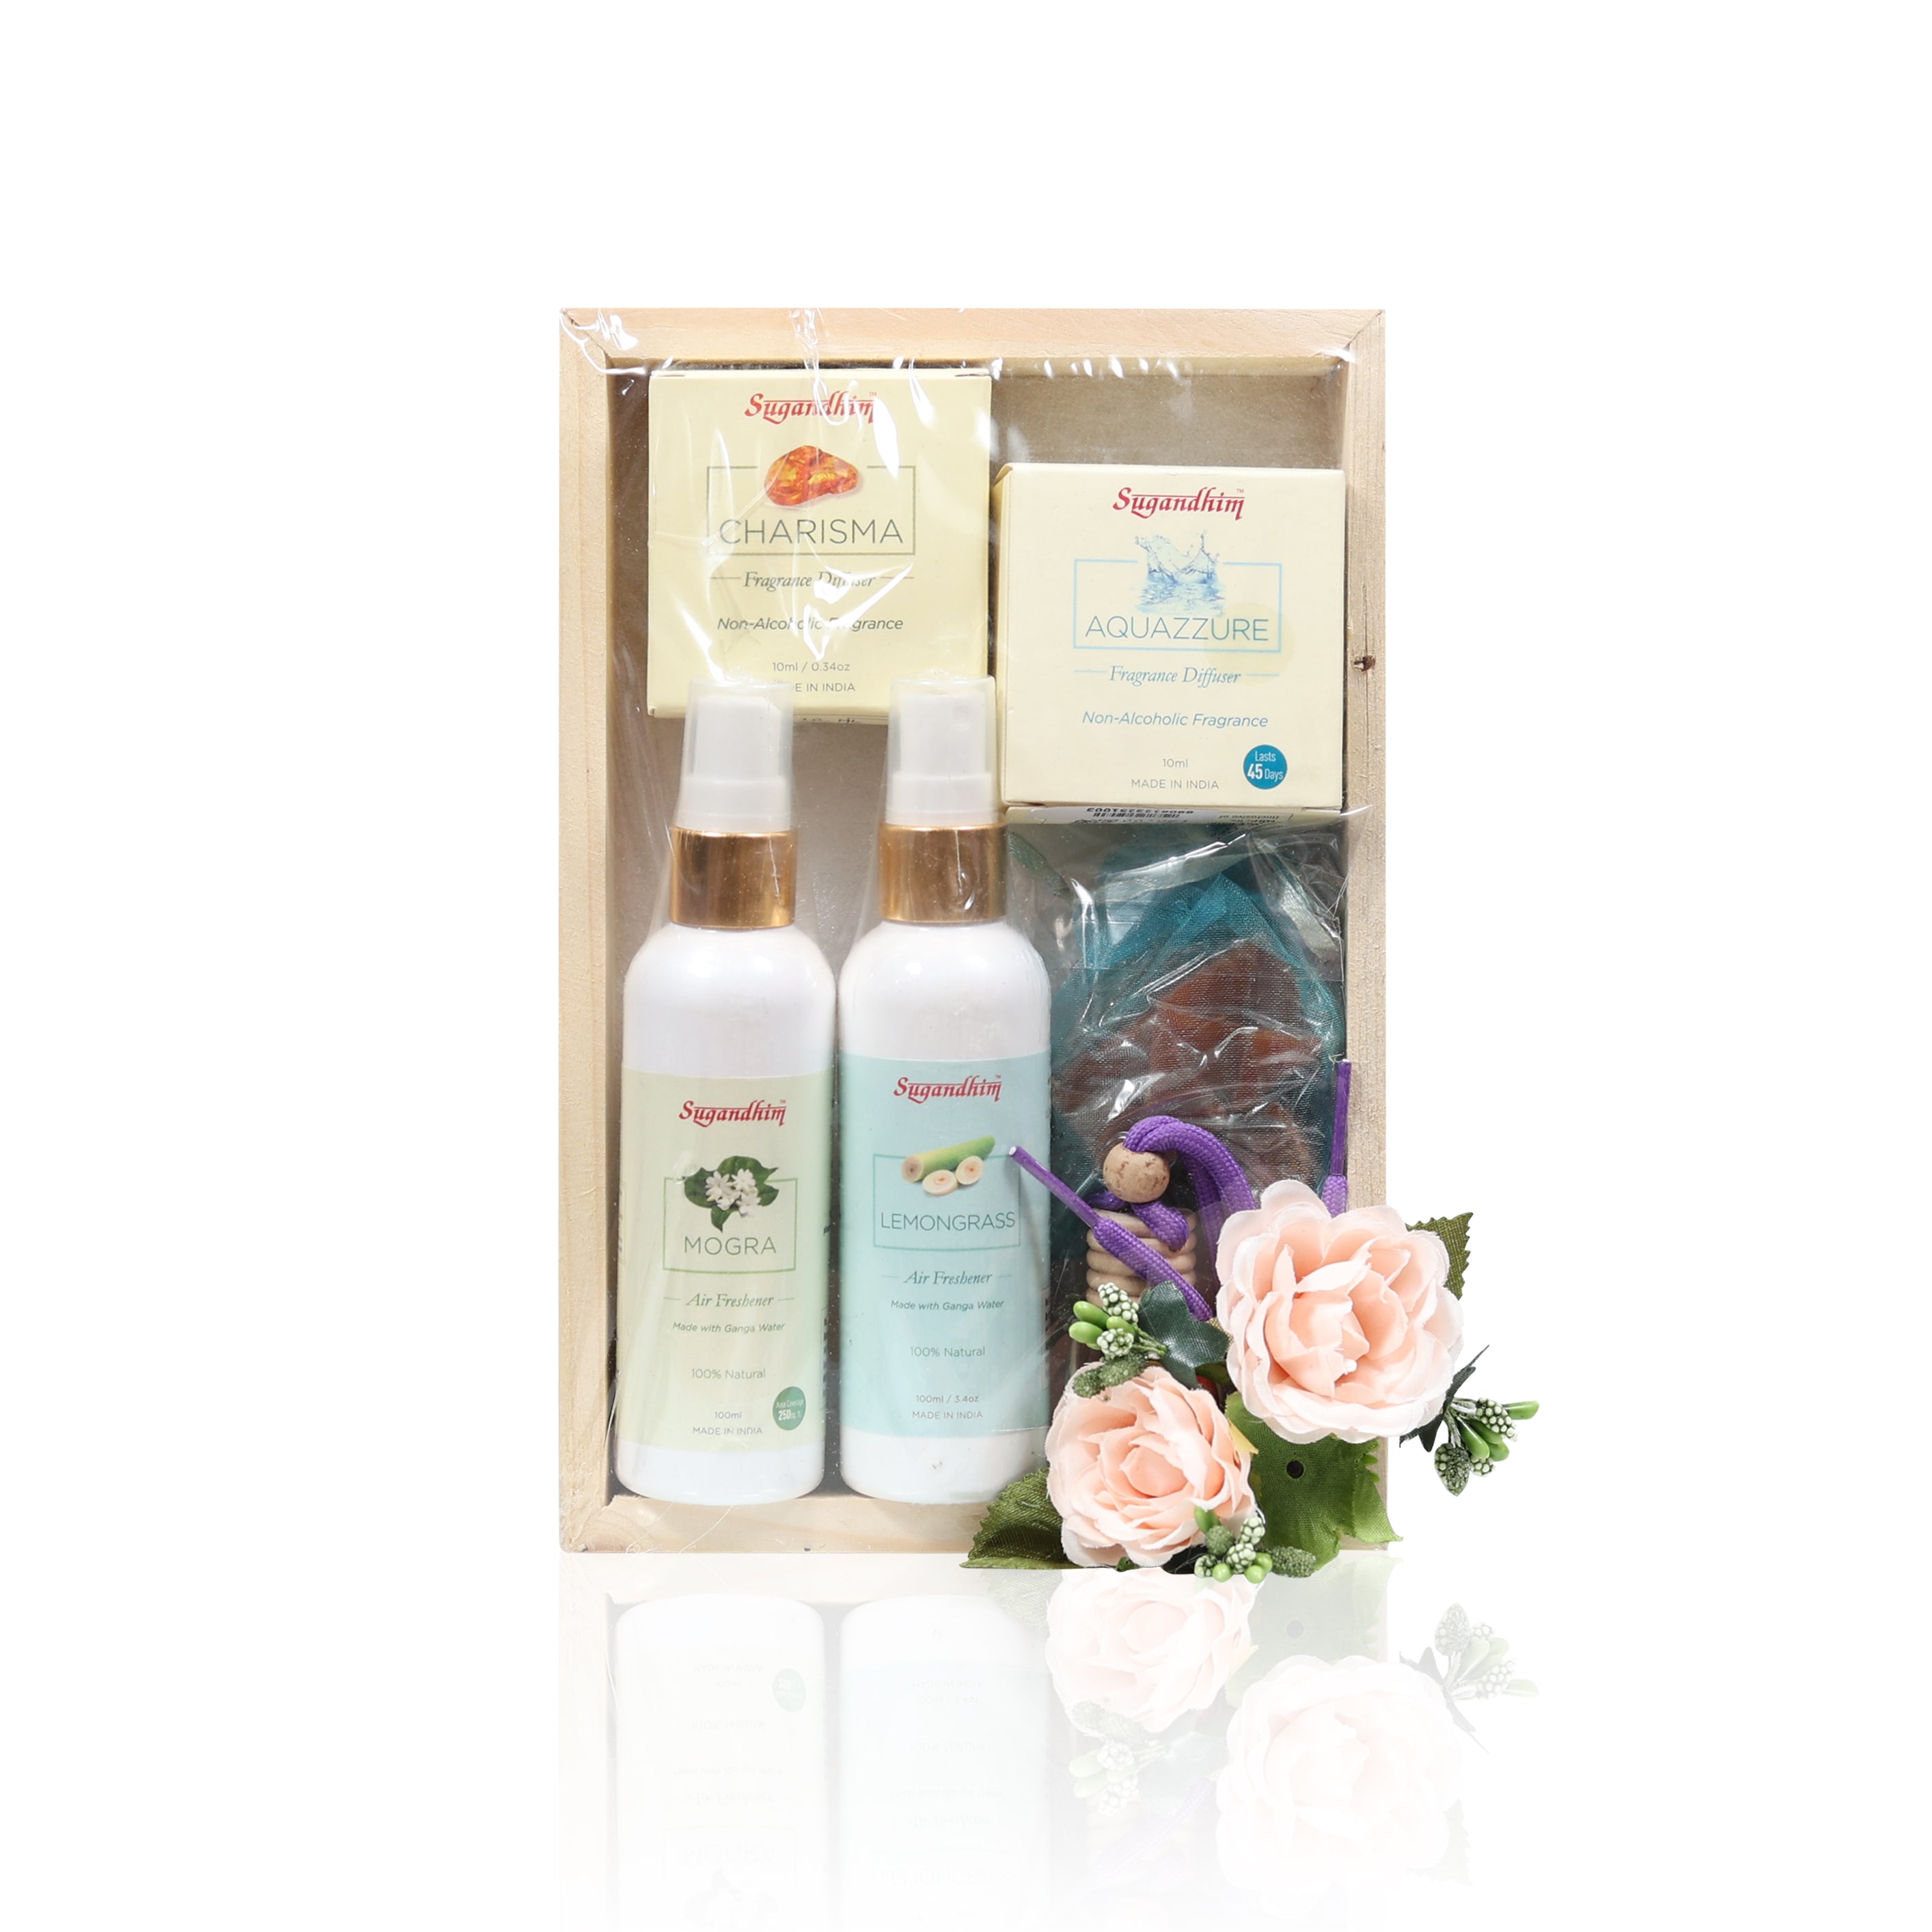 Sugandhim Air Care Gift Set - 5 Products with Wooden Tray